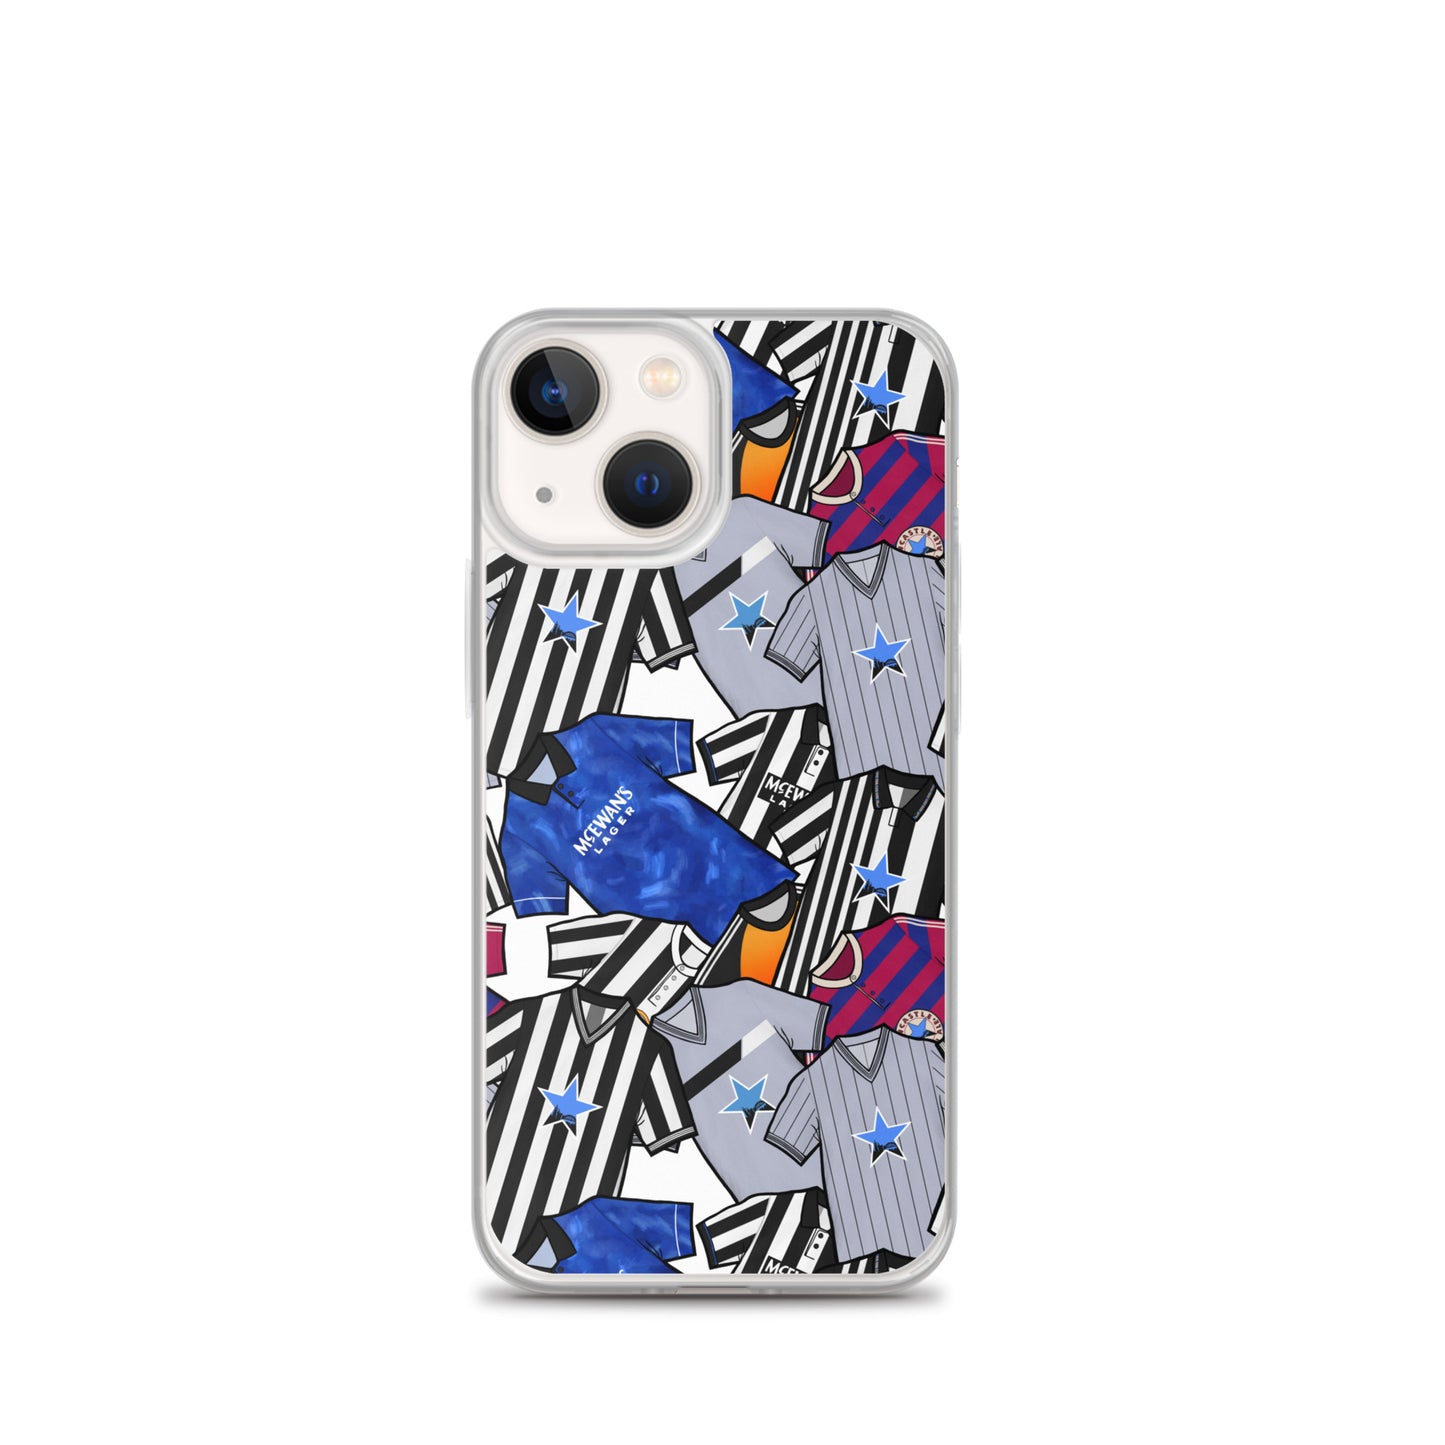 Phone case for iPhone 13 mini inspired by the Retro shirts of Newcastle United!